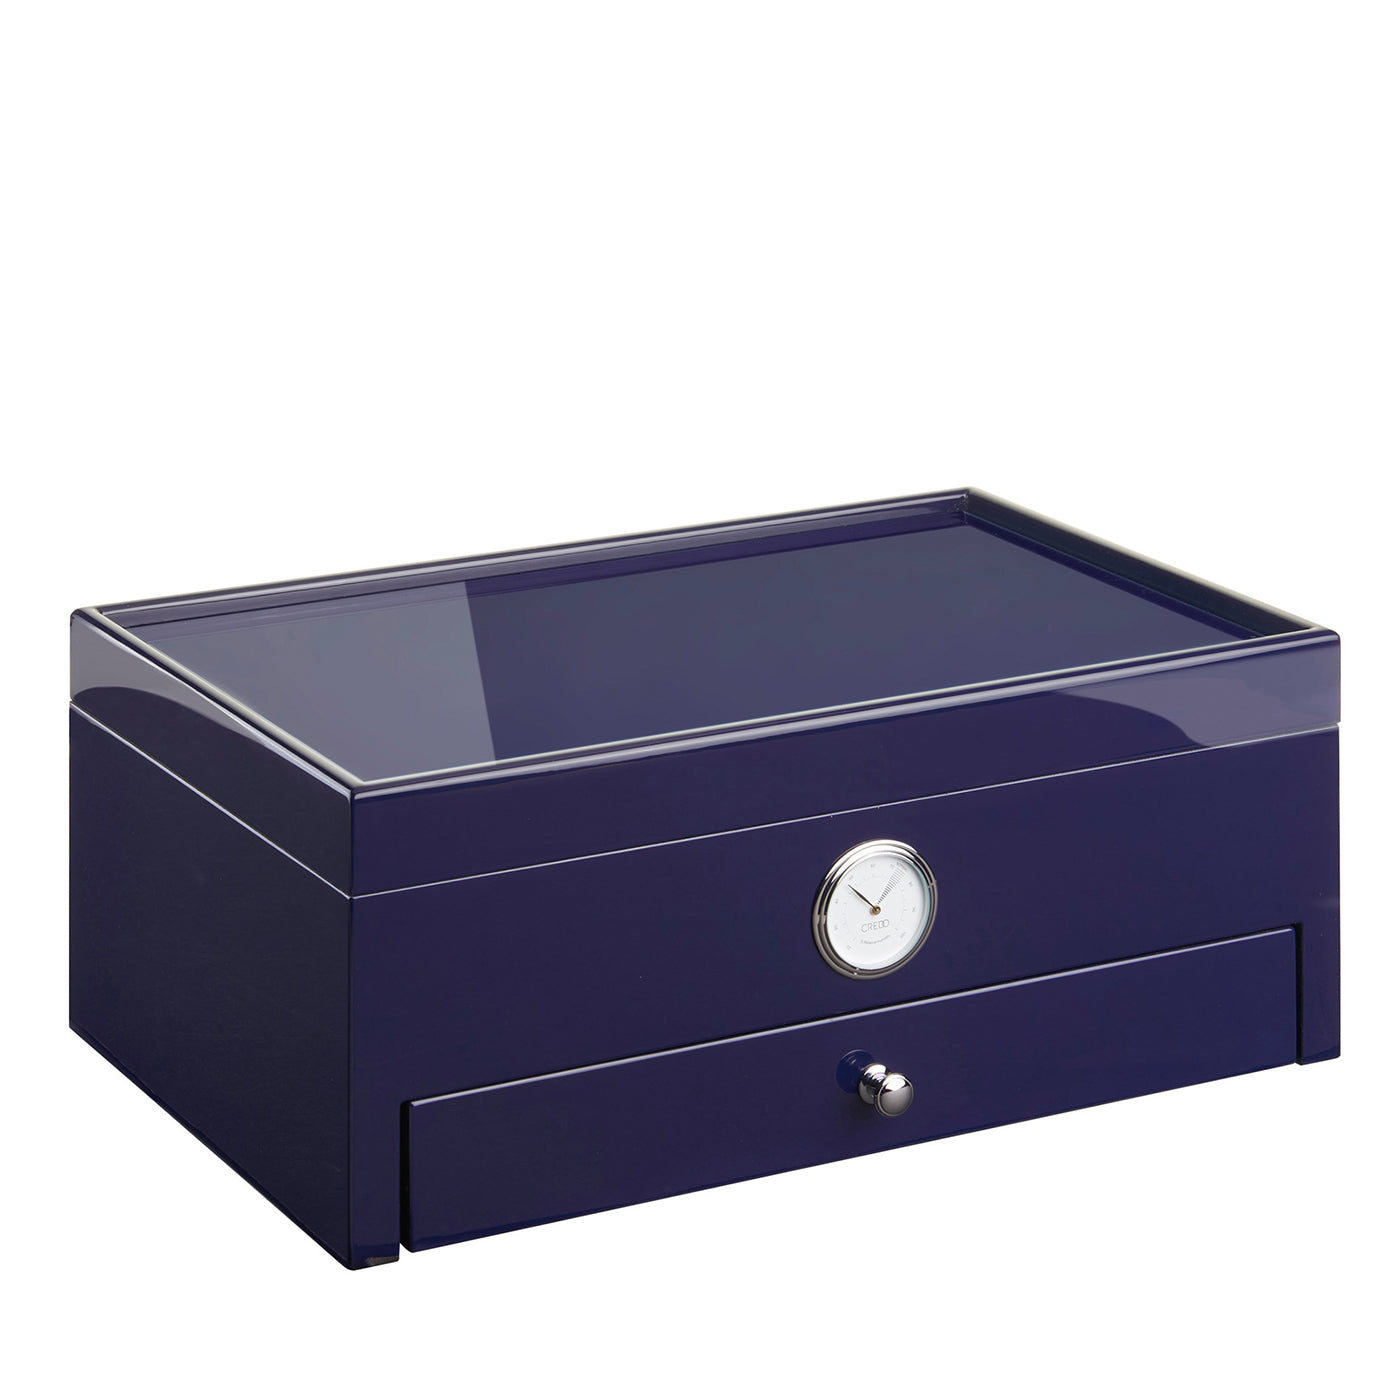 Full Color Blue Humidor (Special Club Edition)  - Main view